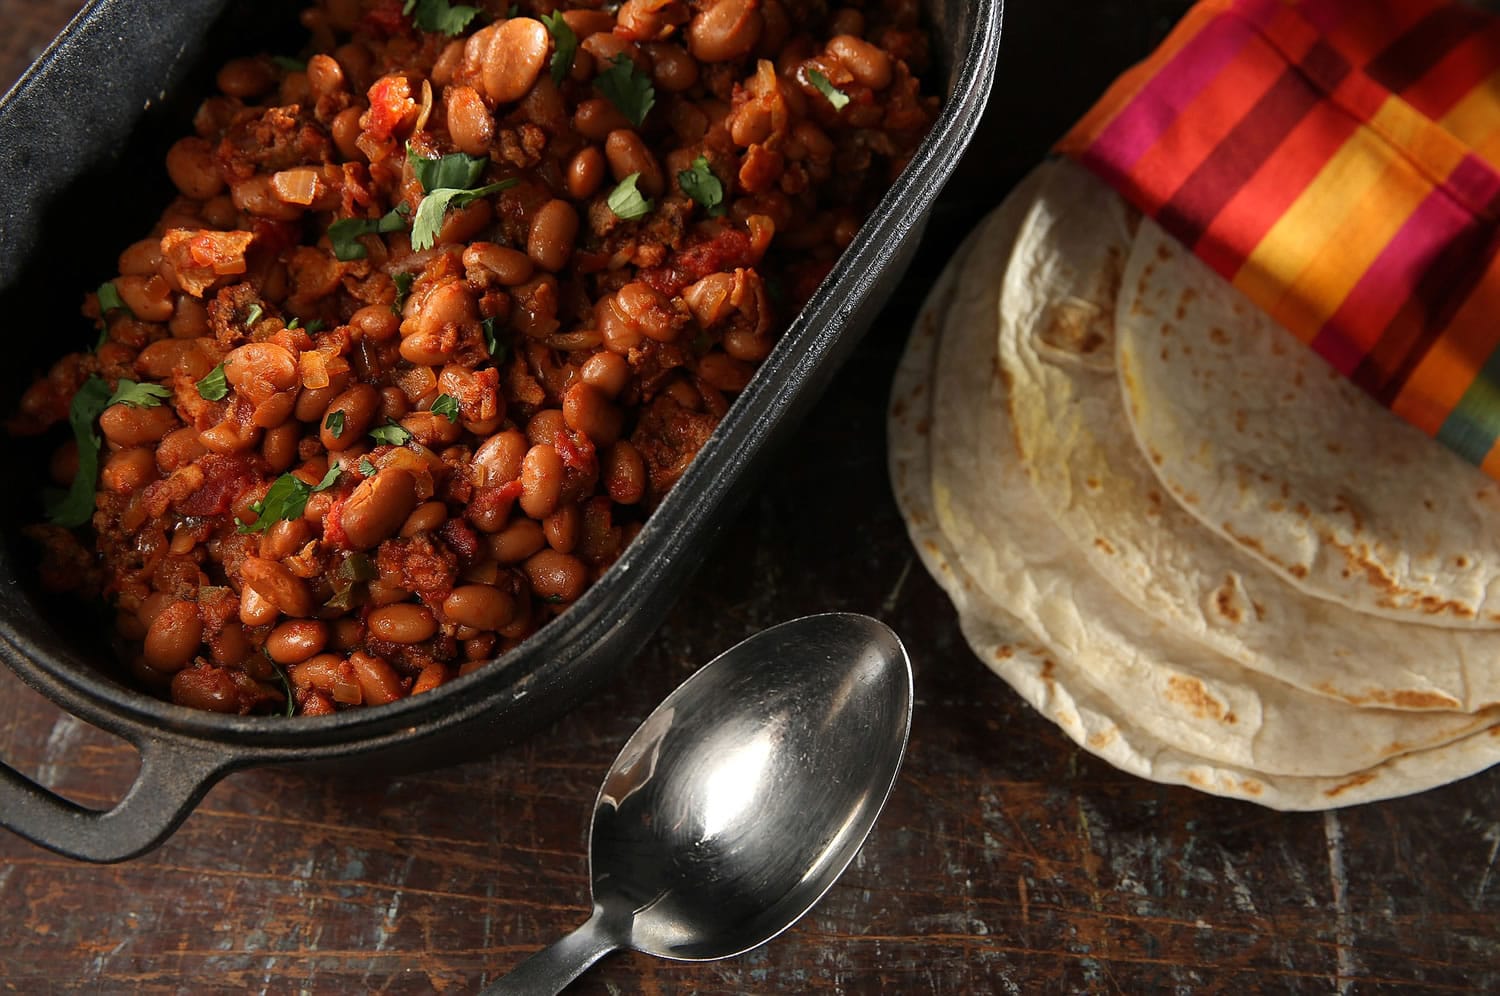 Charro beans derive their flavor from bacon, Mexican chorizo and jalapeno.